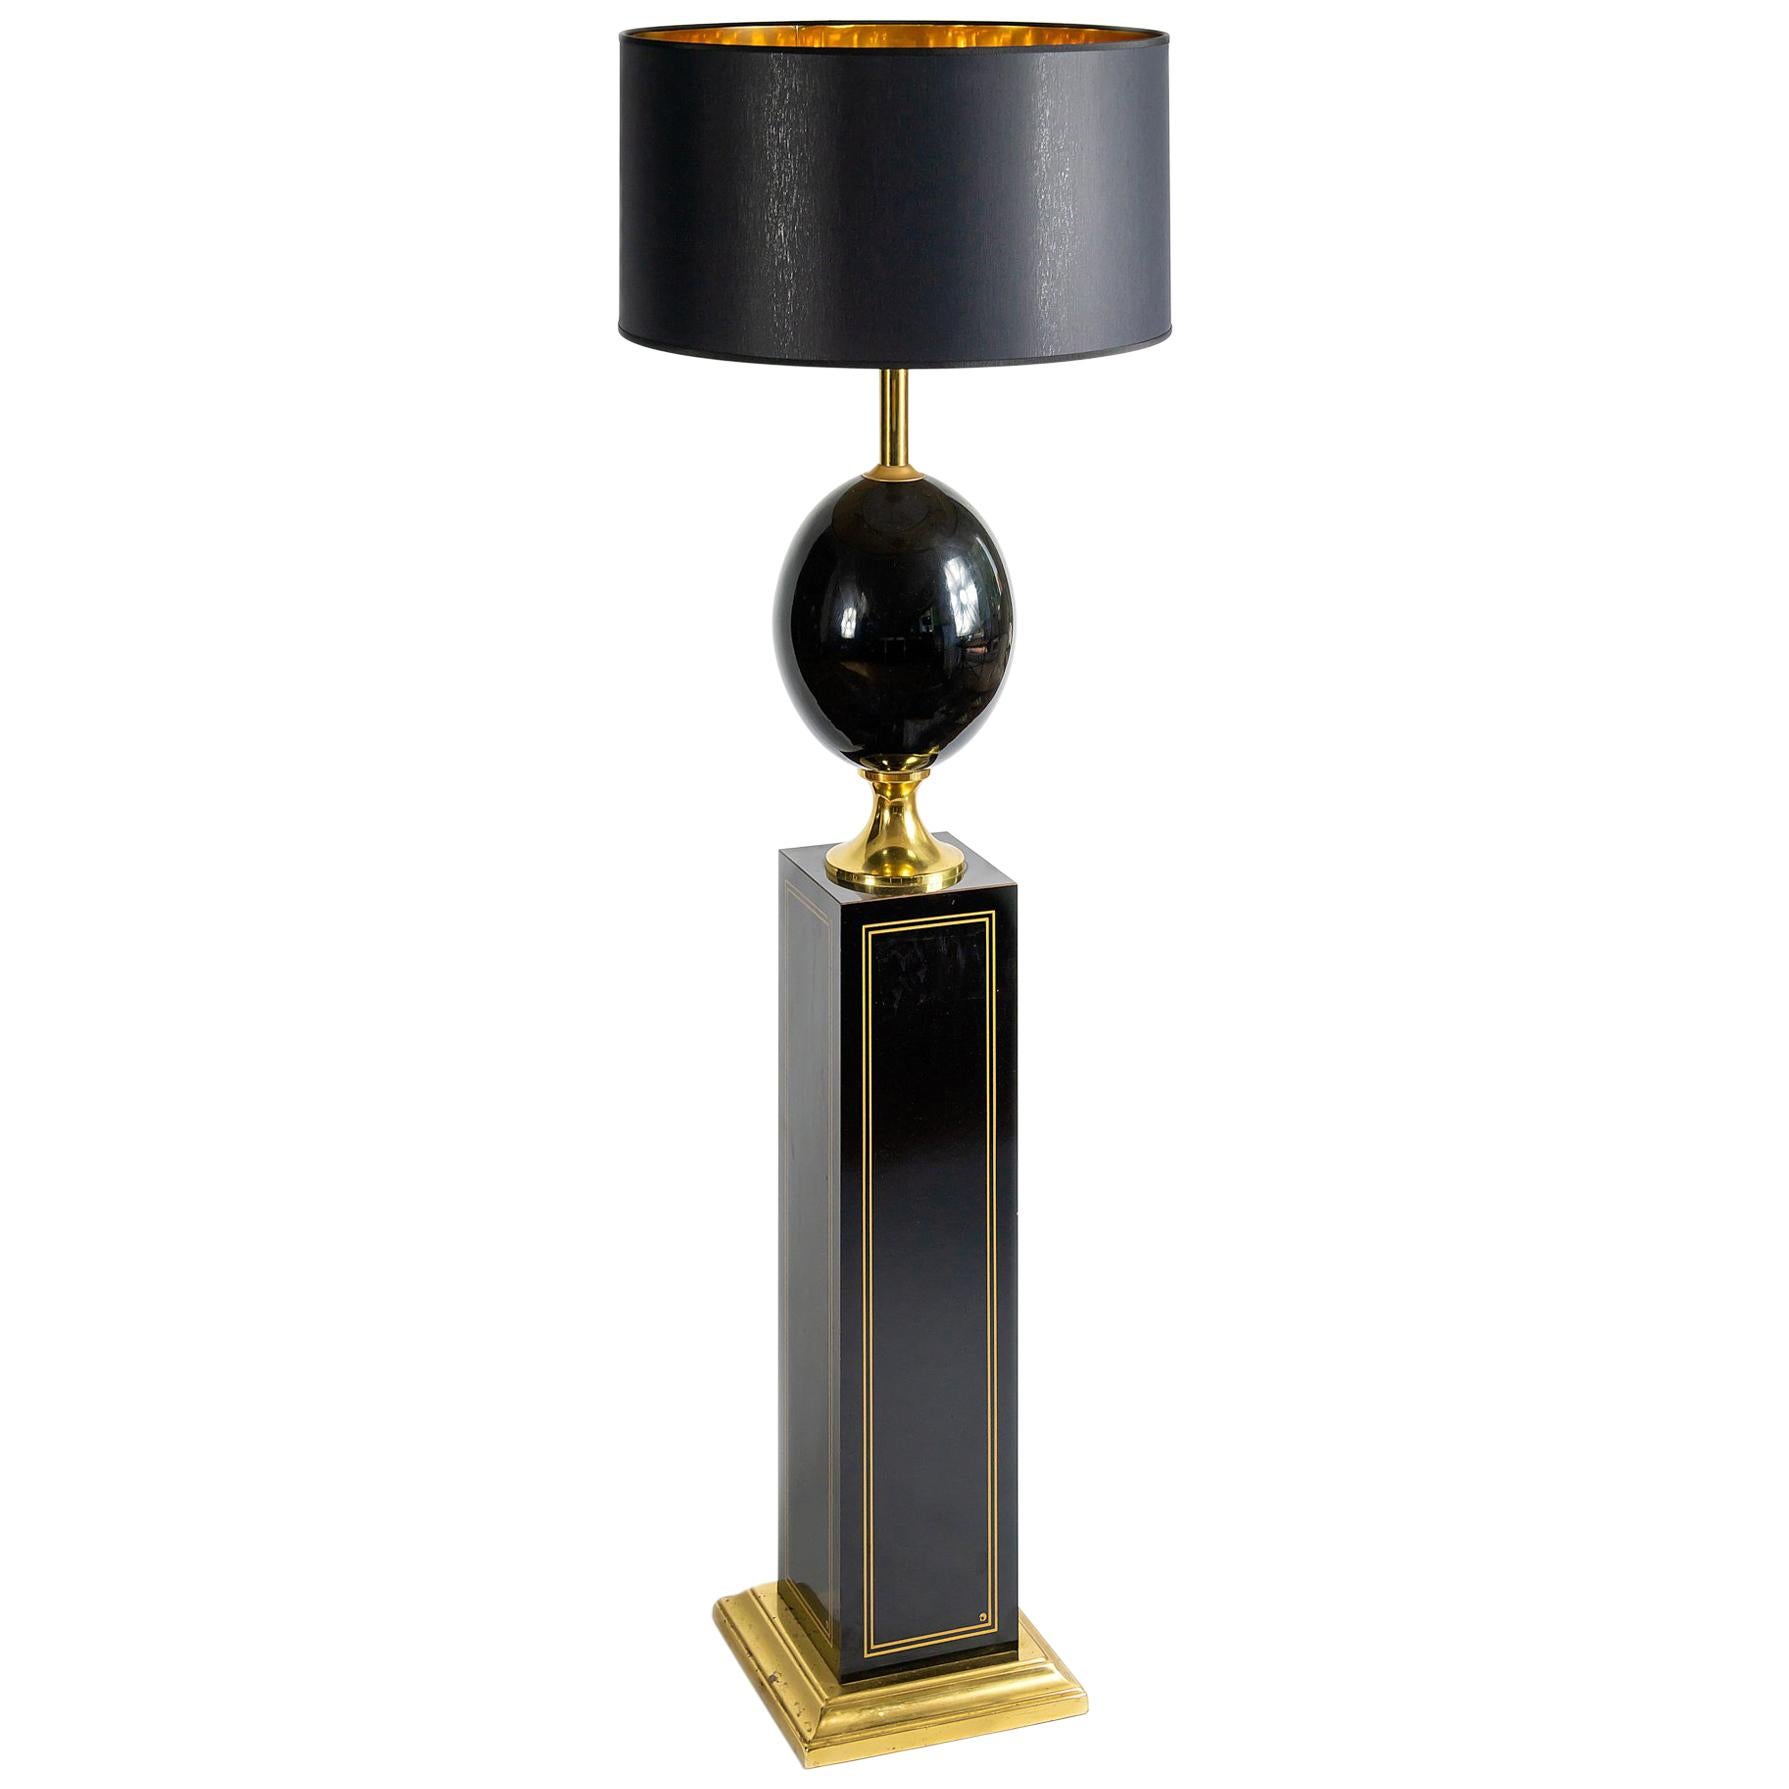 Midcentury French lamp by Maison Le Dauphin